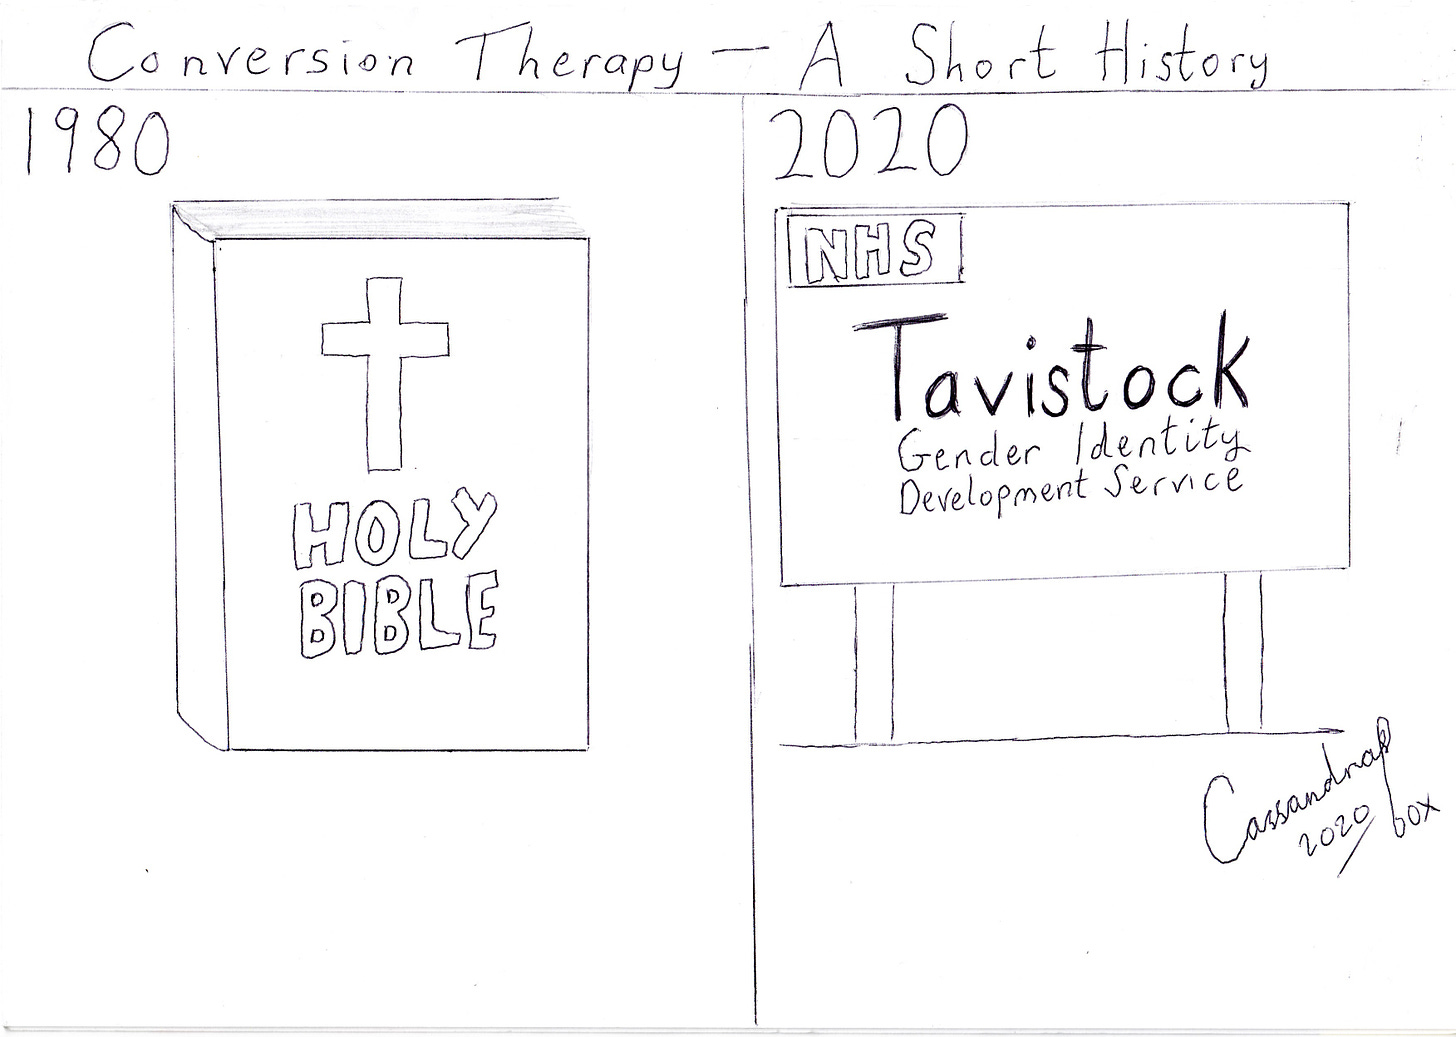 Cartoon reading 'Conversion Therapy: A Short History'. On the left, the year 1980 with a Bible, on the right, the year 2020 with a sigh stating 'NHS Tavistock Gender Identity Development Service'